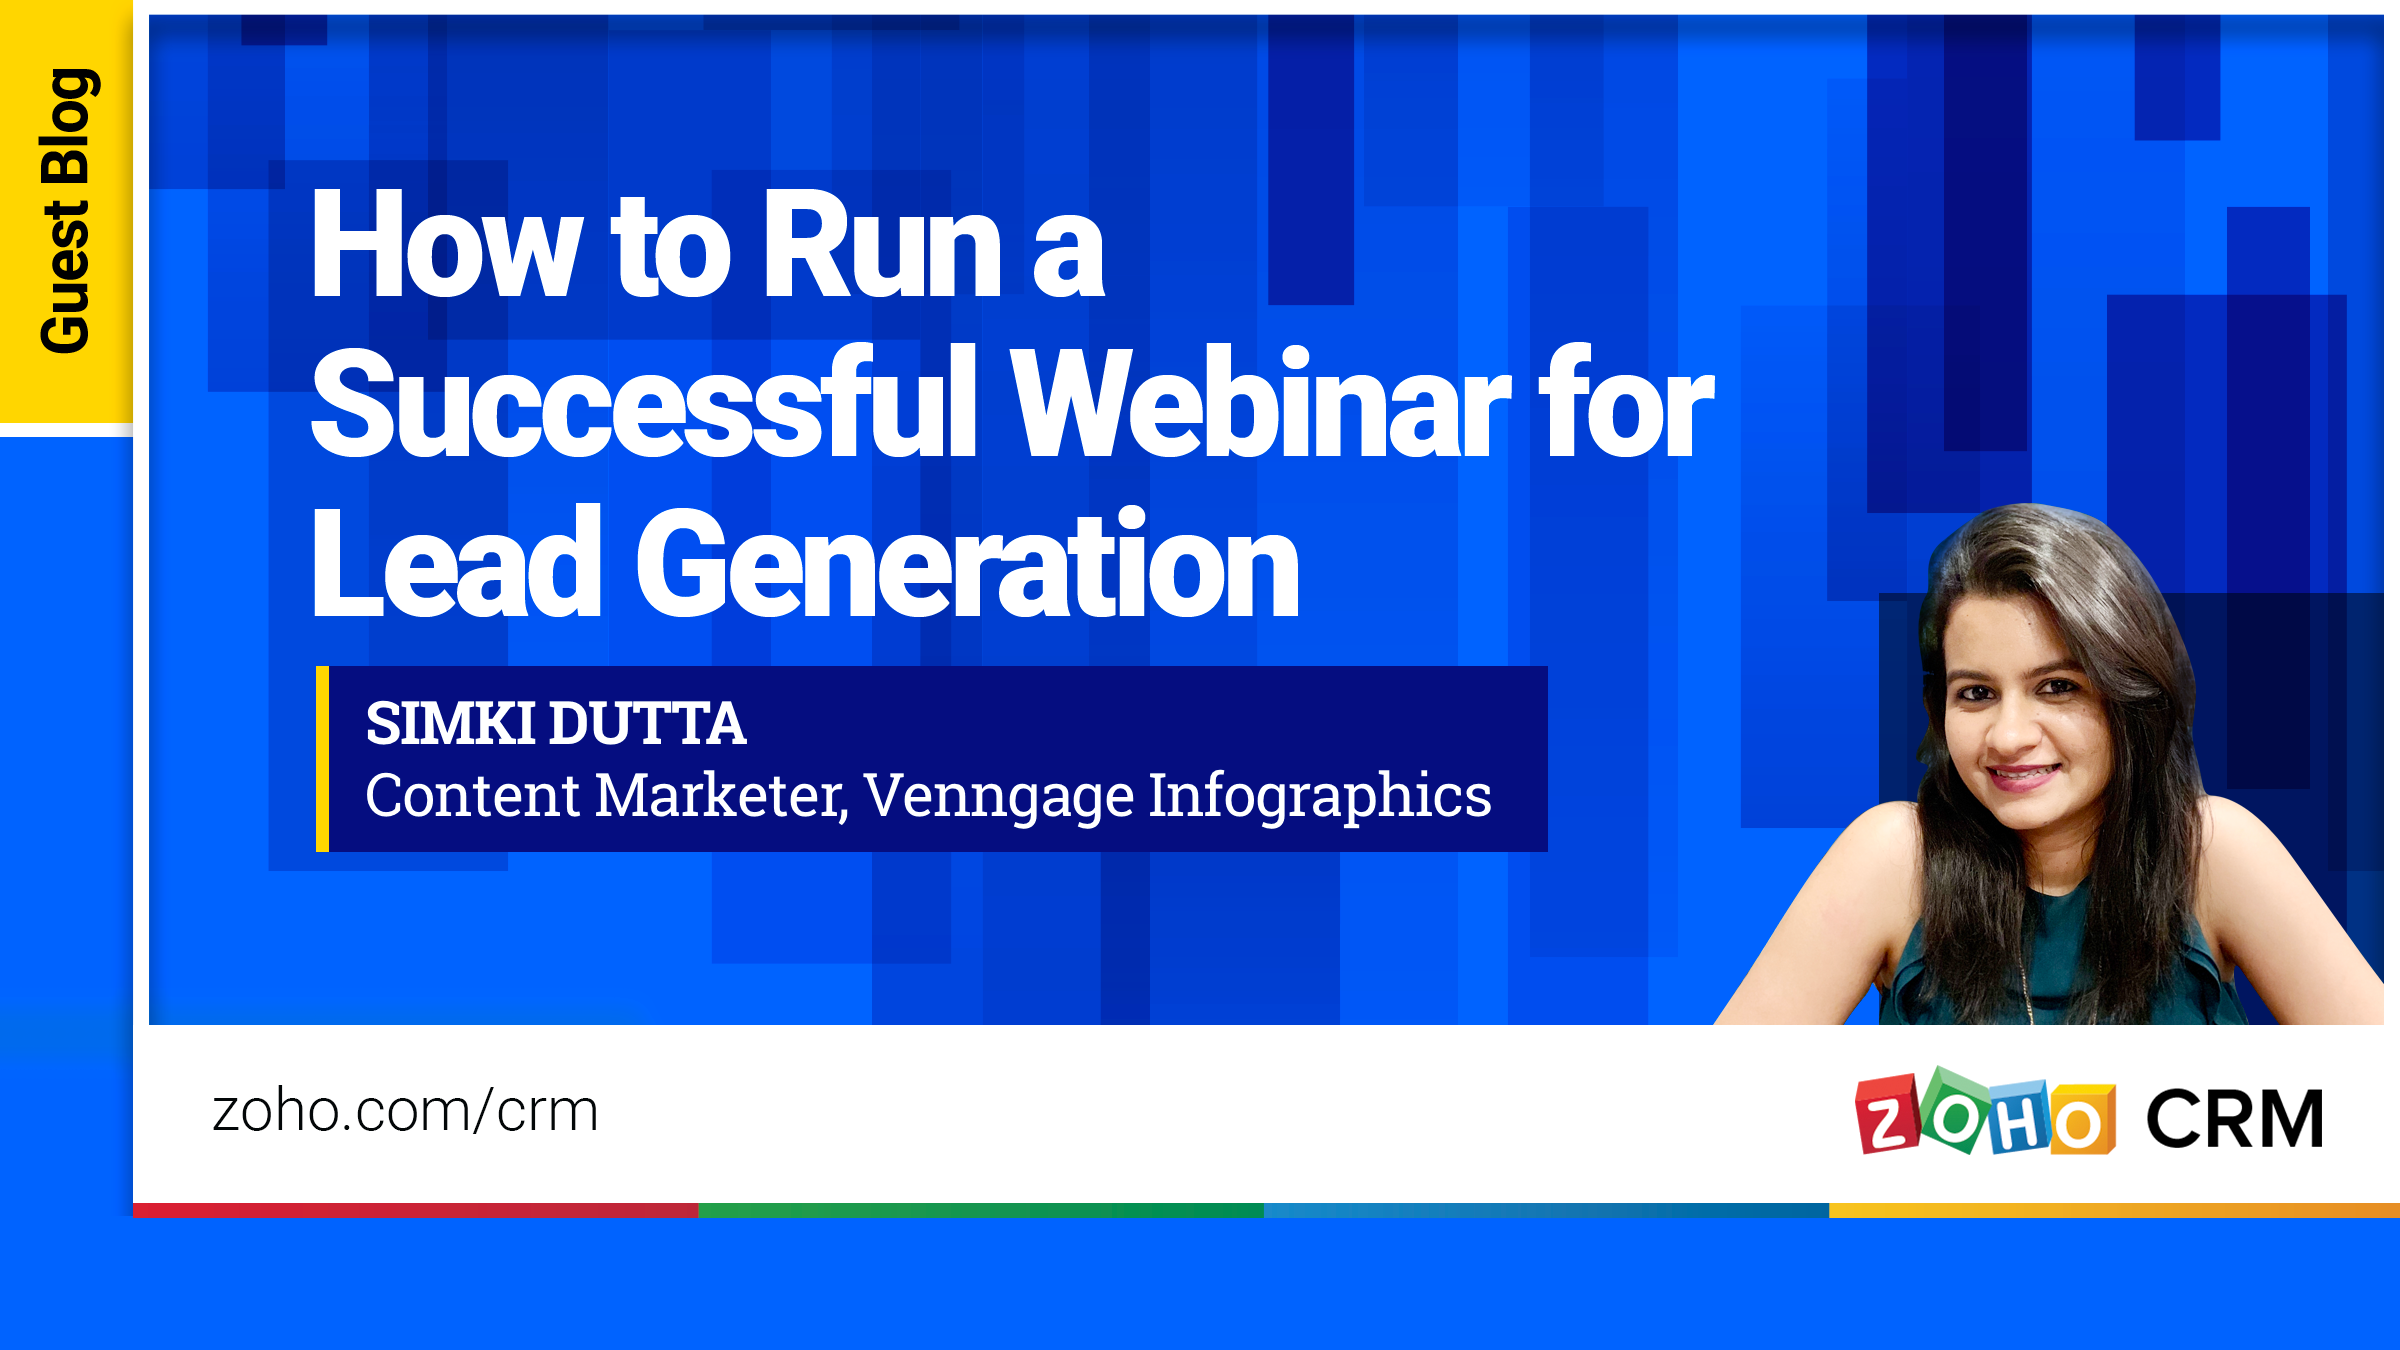 How to Run a Successful Webinar for Lead Generation